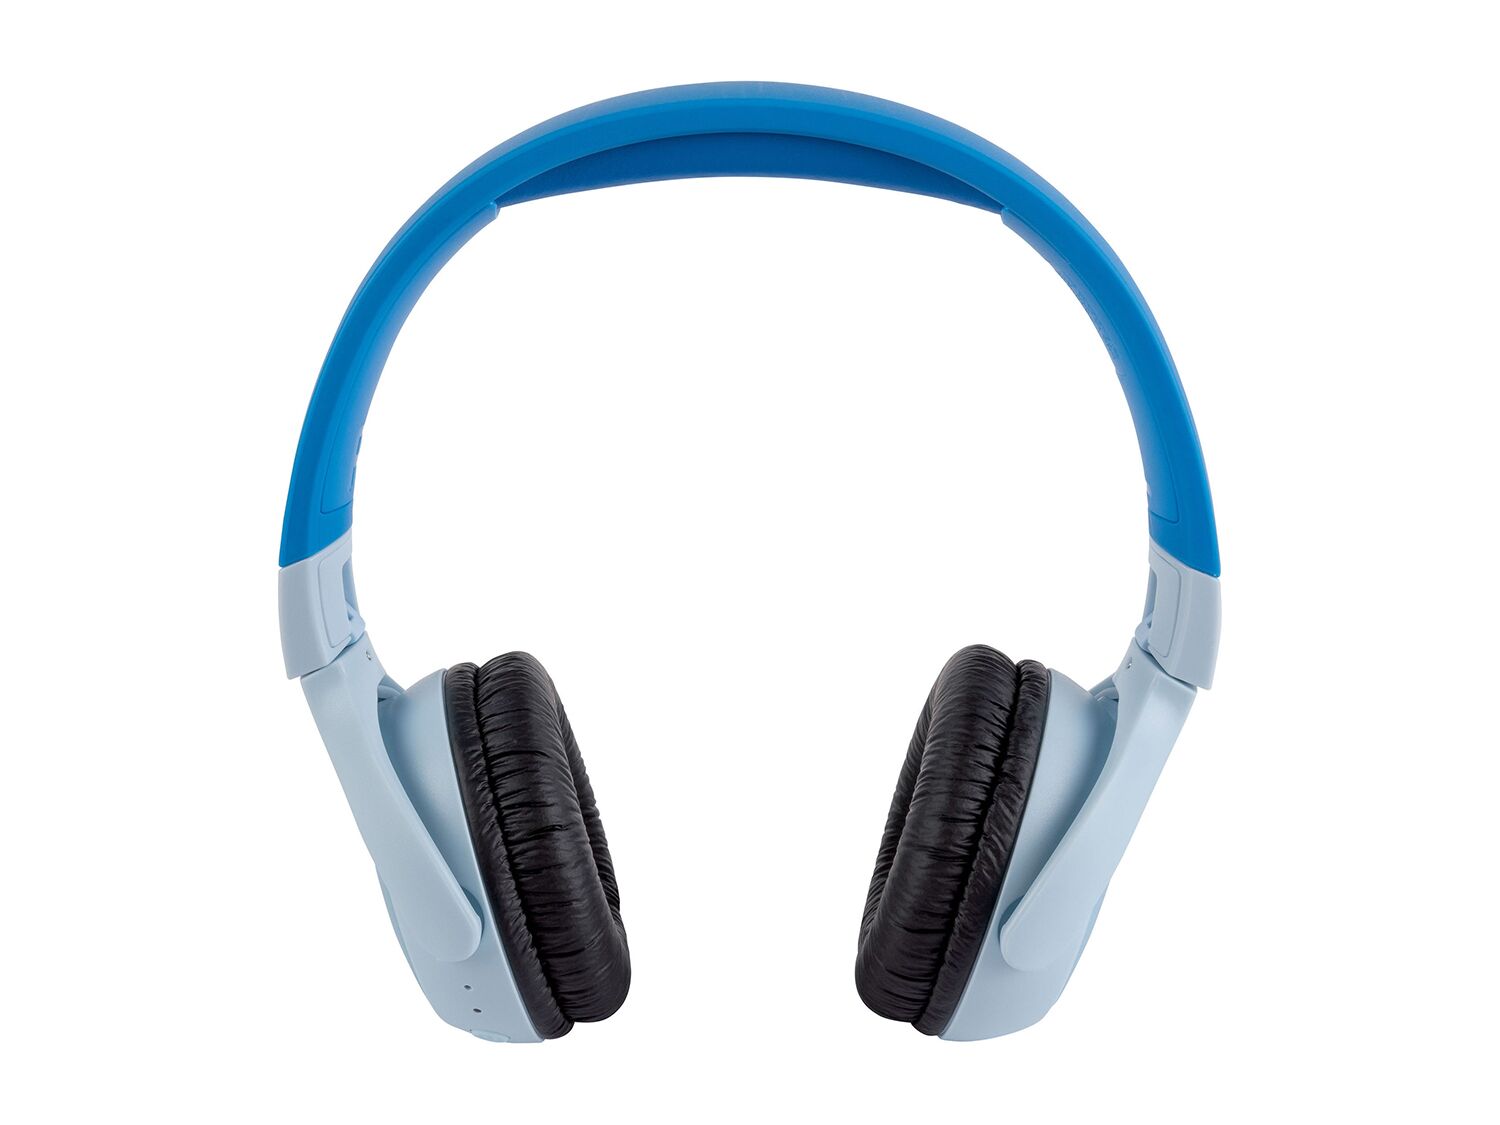 Philips auriculares infantiles con Bluetooth 